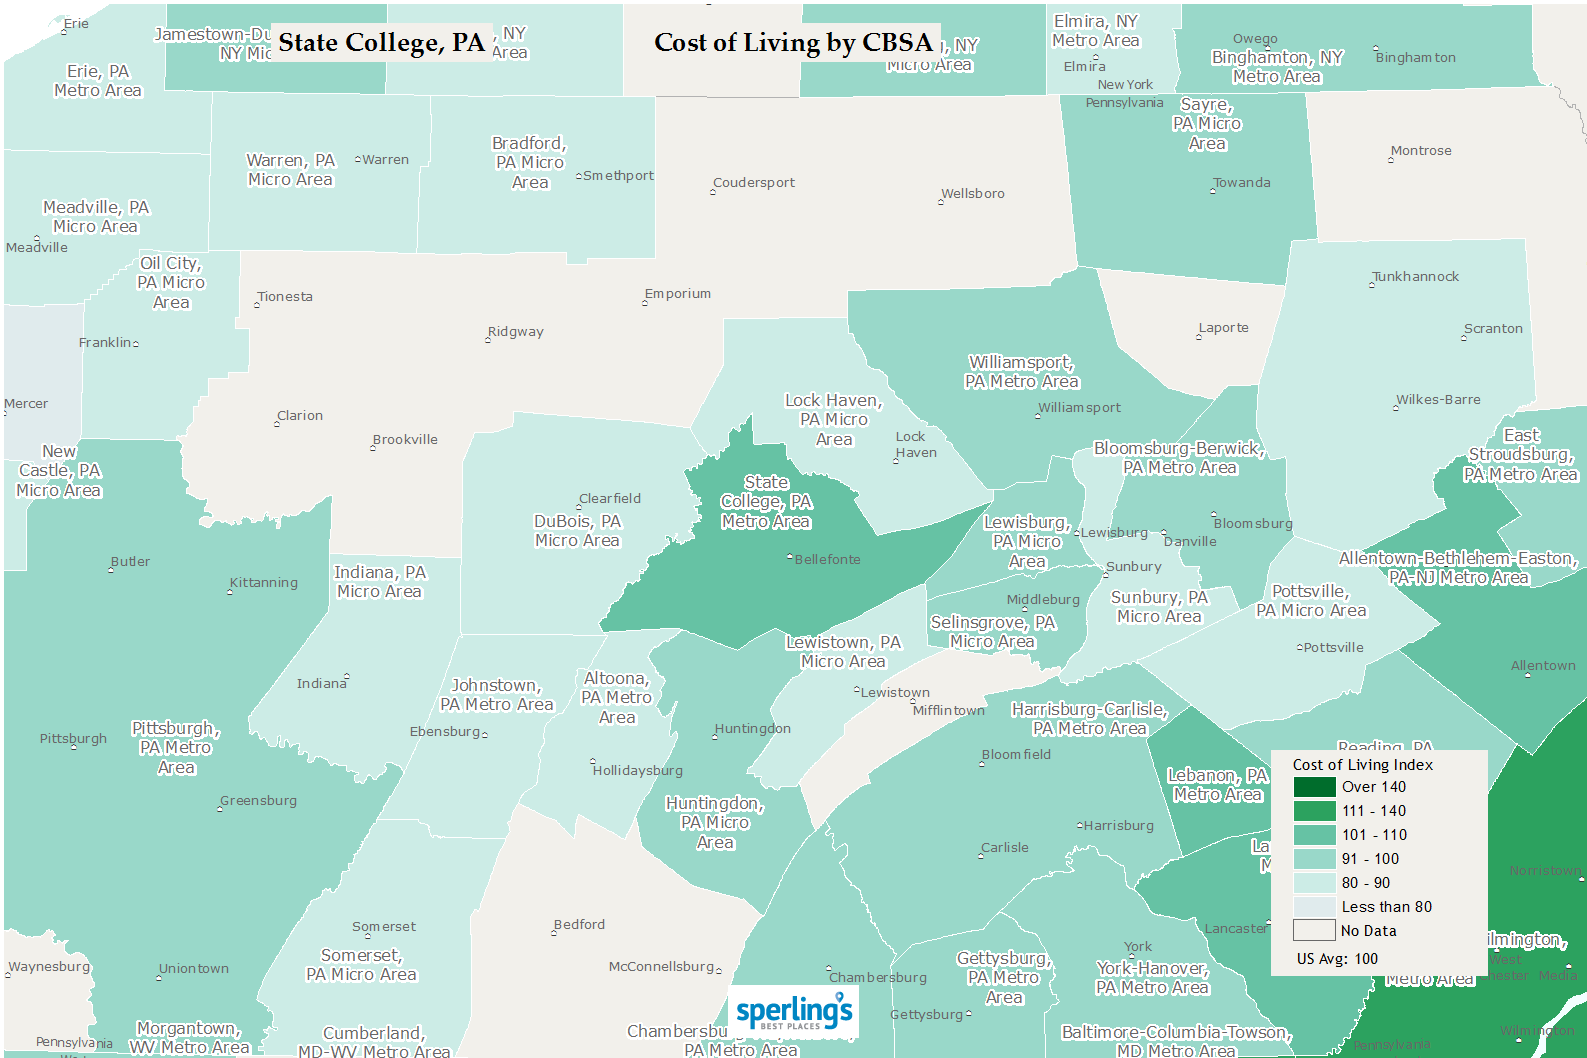 Best Places to Live | Compare cost of living, crime, cities, schools